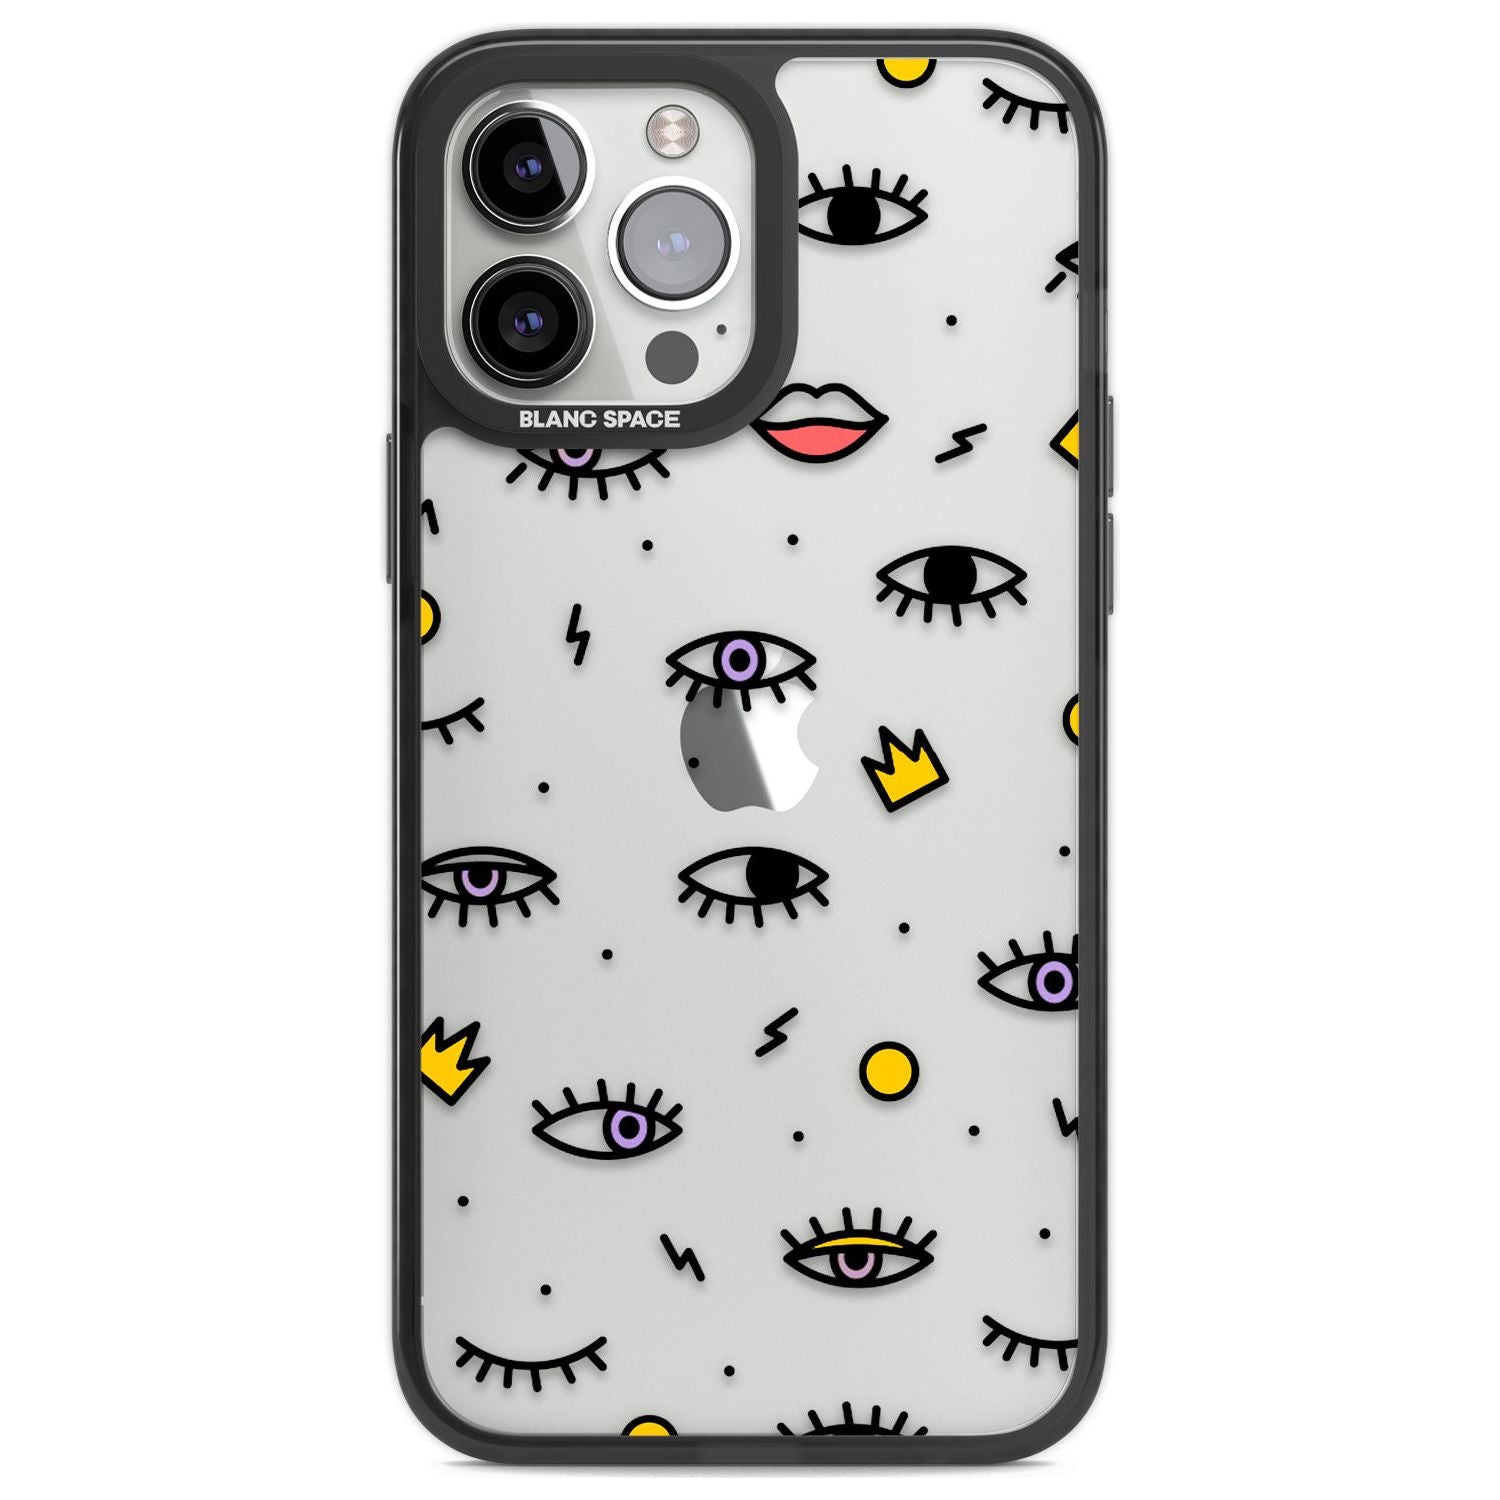 Eyes & Lips Icons Phone Case iPhone 13 Pro Max / Black Impact Case,iPhone 14 Pro Max / Black Impact Case Blanc Space